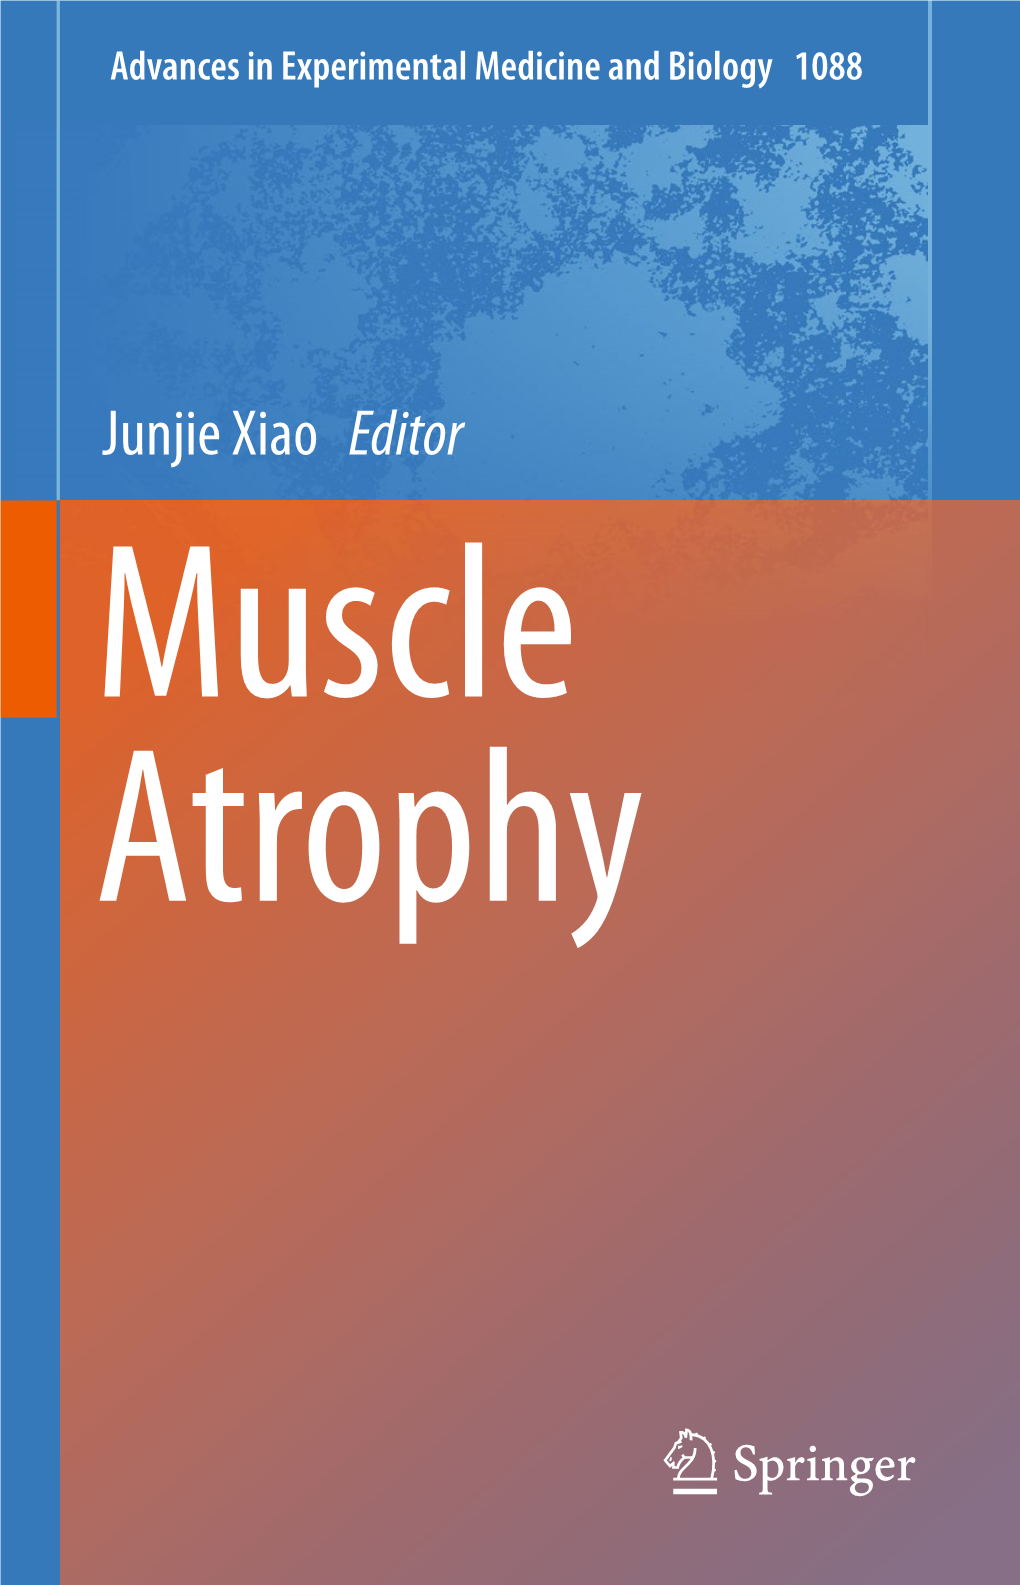 Role in Skeletal Muscle Atrophy ���������������������������������������������������������������������������������������� 267 Anastasia Thoma and Adam P